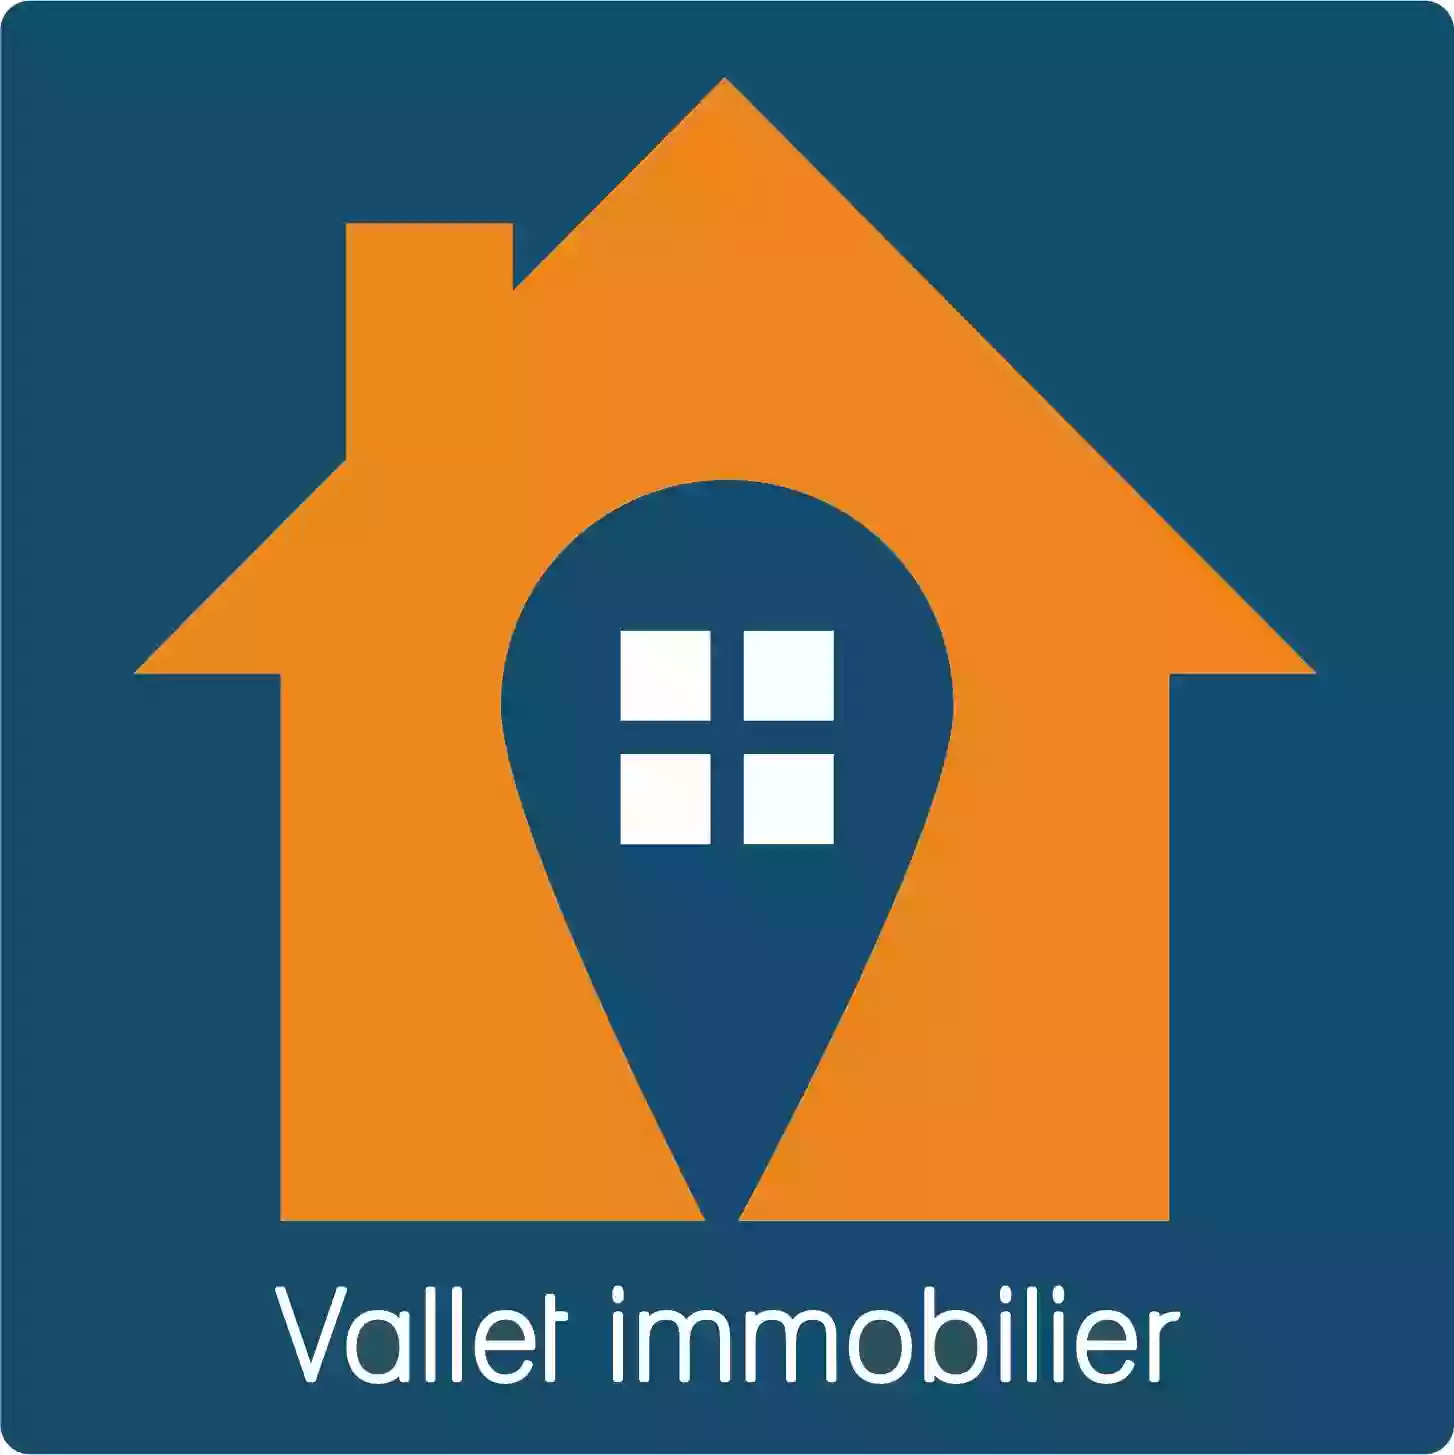 Vallet Immobilier 44